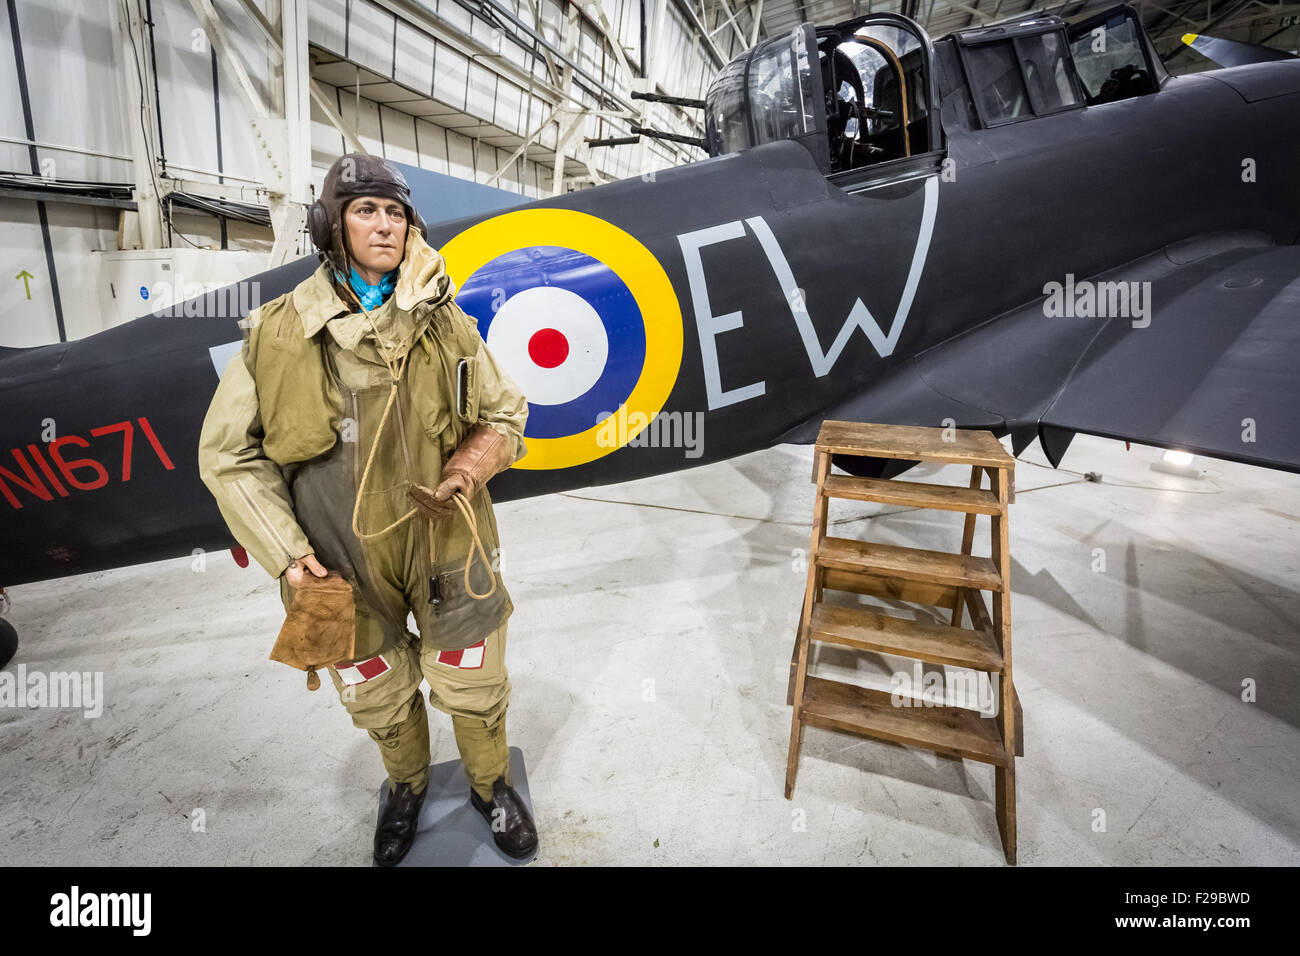 London, UK. 14th September, 2015. Boulton Paul Defiant two-seat turret fighter. The RAF Museum ‘Our Finest Hour’ aircraft display evening in commemoration of the 75th anniversary of the Battle of Britain Credit:  Guy Corbishley/Alamy Live News Stock Photo